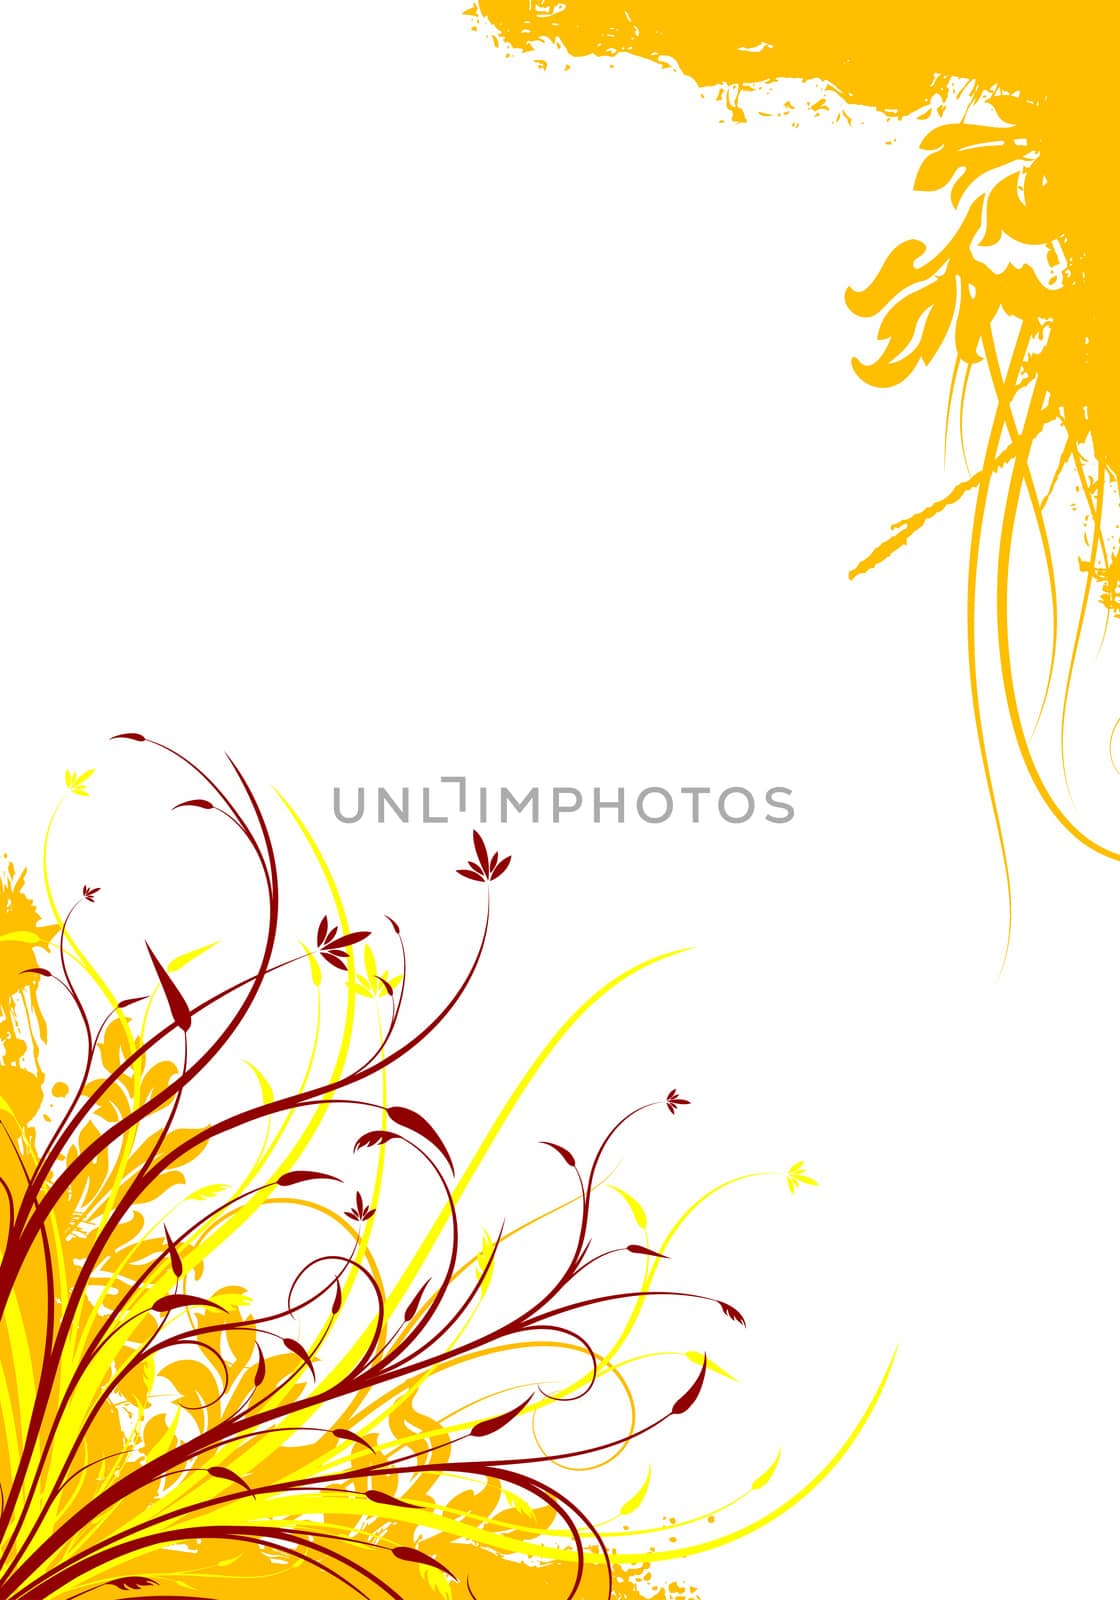 abstract grunge floral decorative background vector illustration